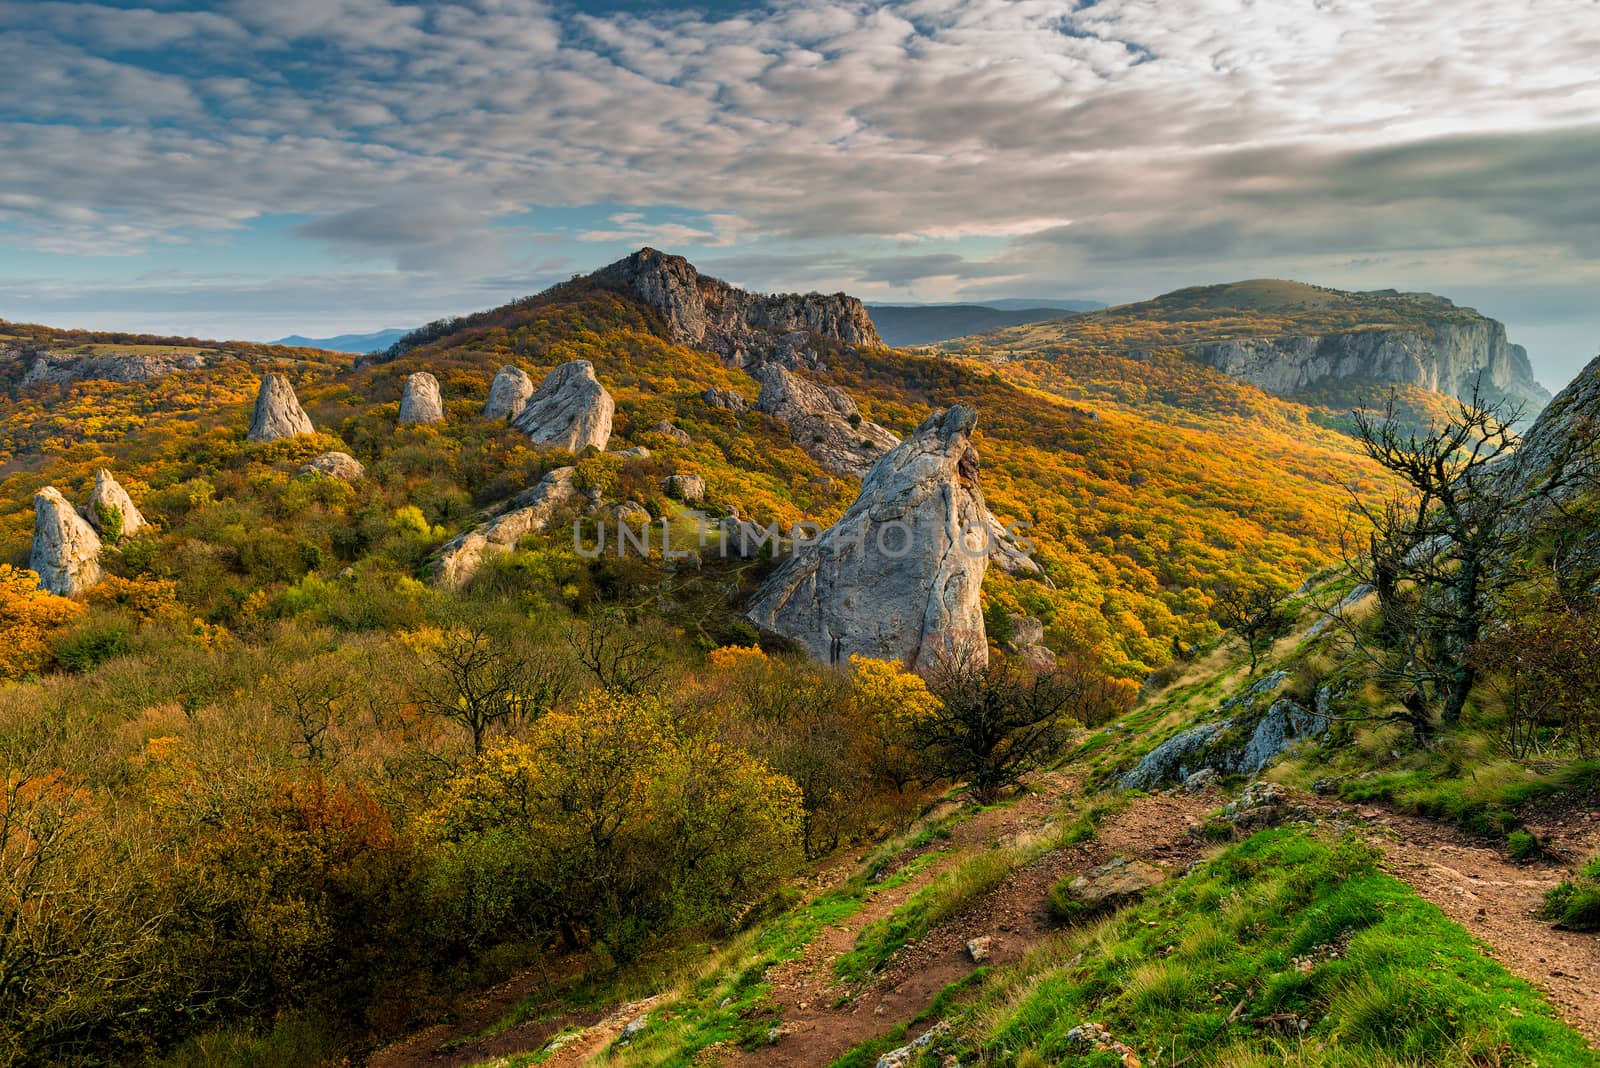 View of the landmark of the Crimea-Sun Temple in the mountains by kosmsos111